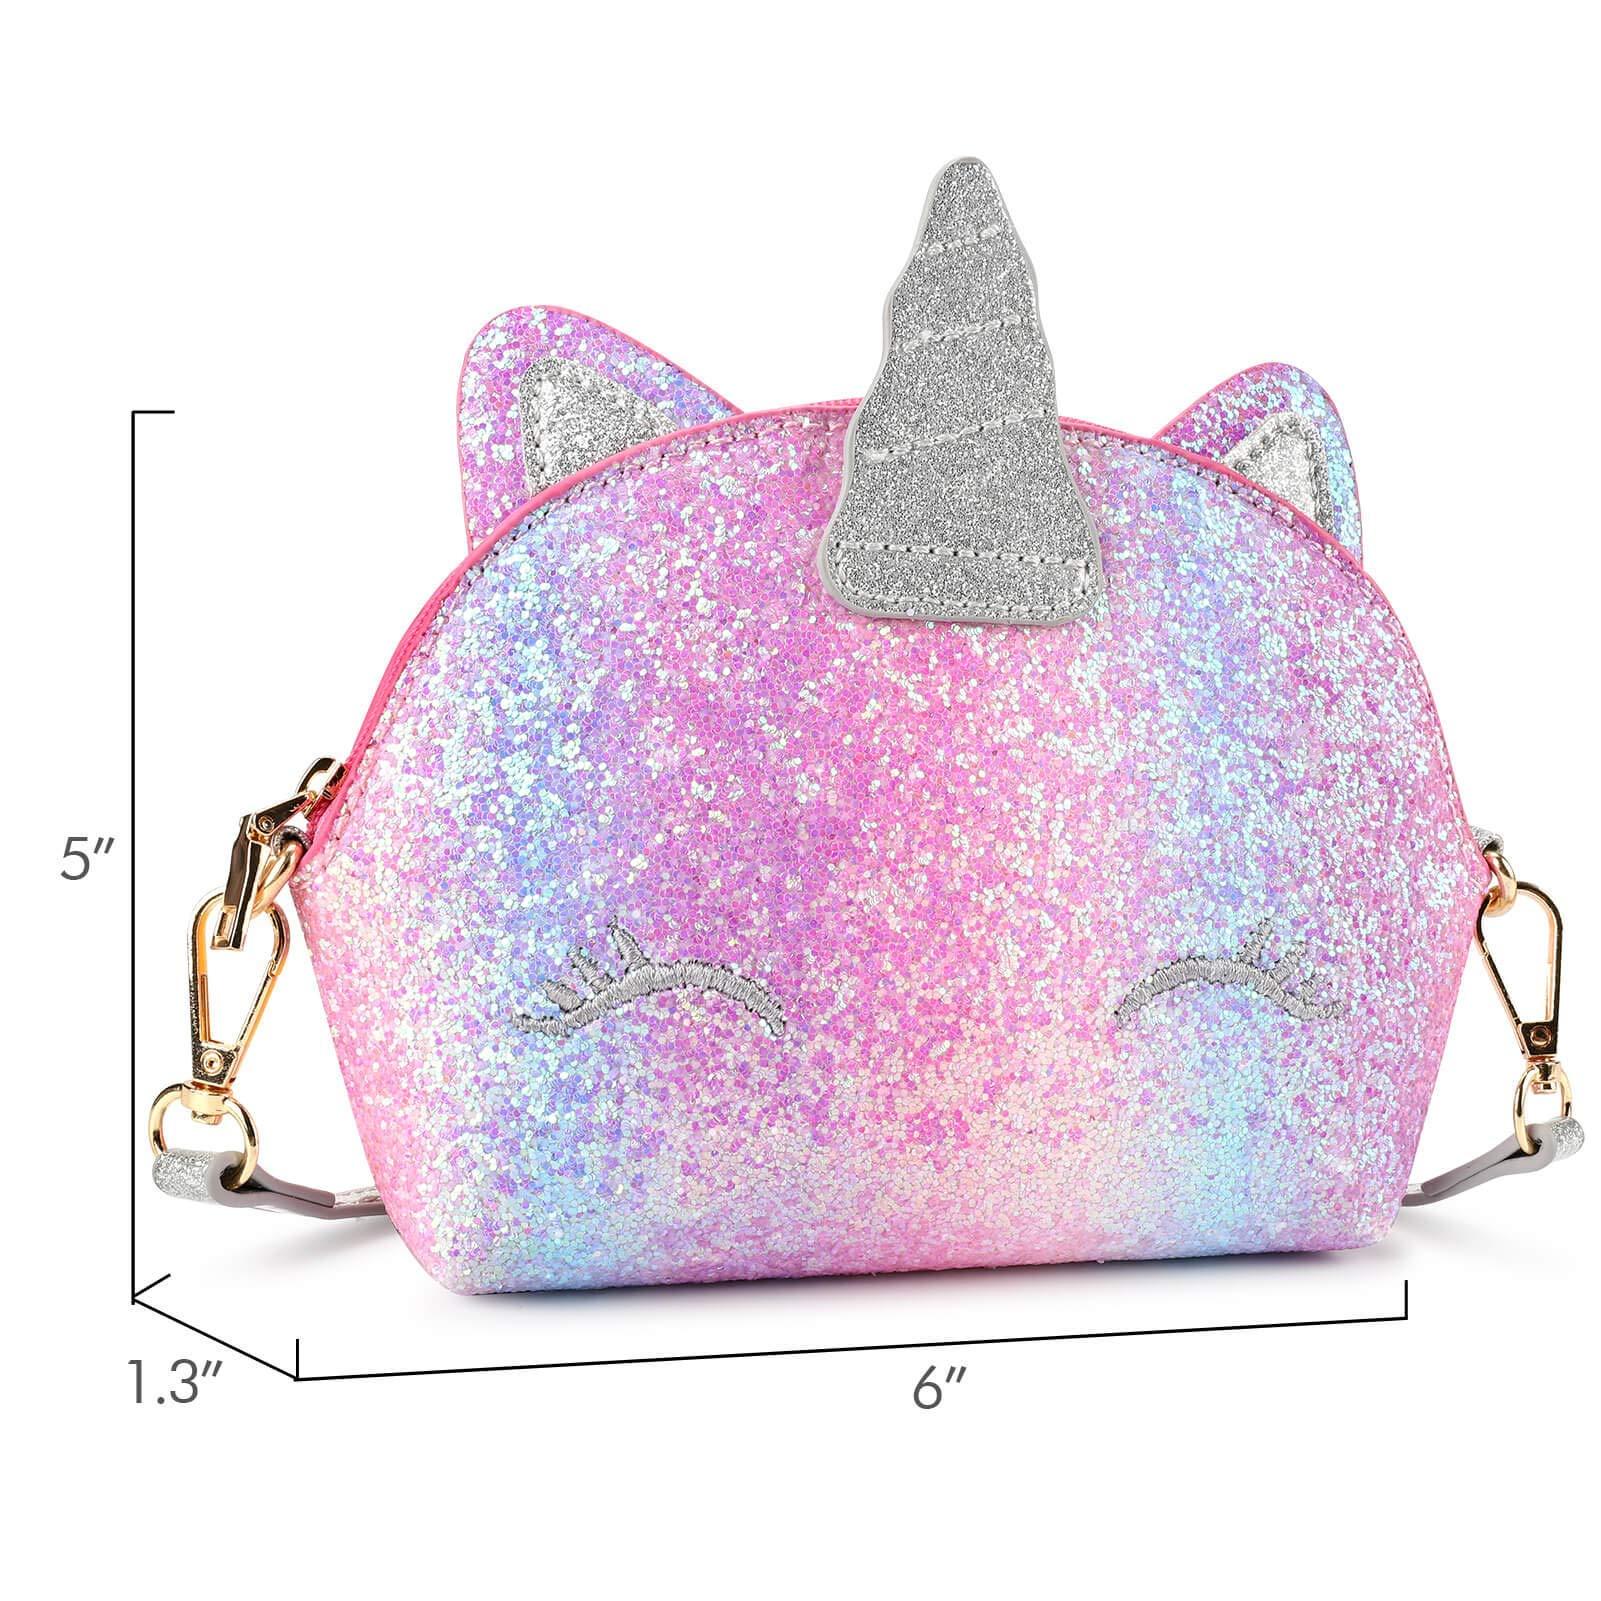 Buy Nyra Decor Unicorn Sling Bags Shoulder Bag Hand Bag Purse for Kids  Girls at Amazon.in